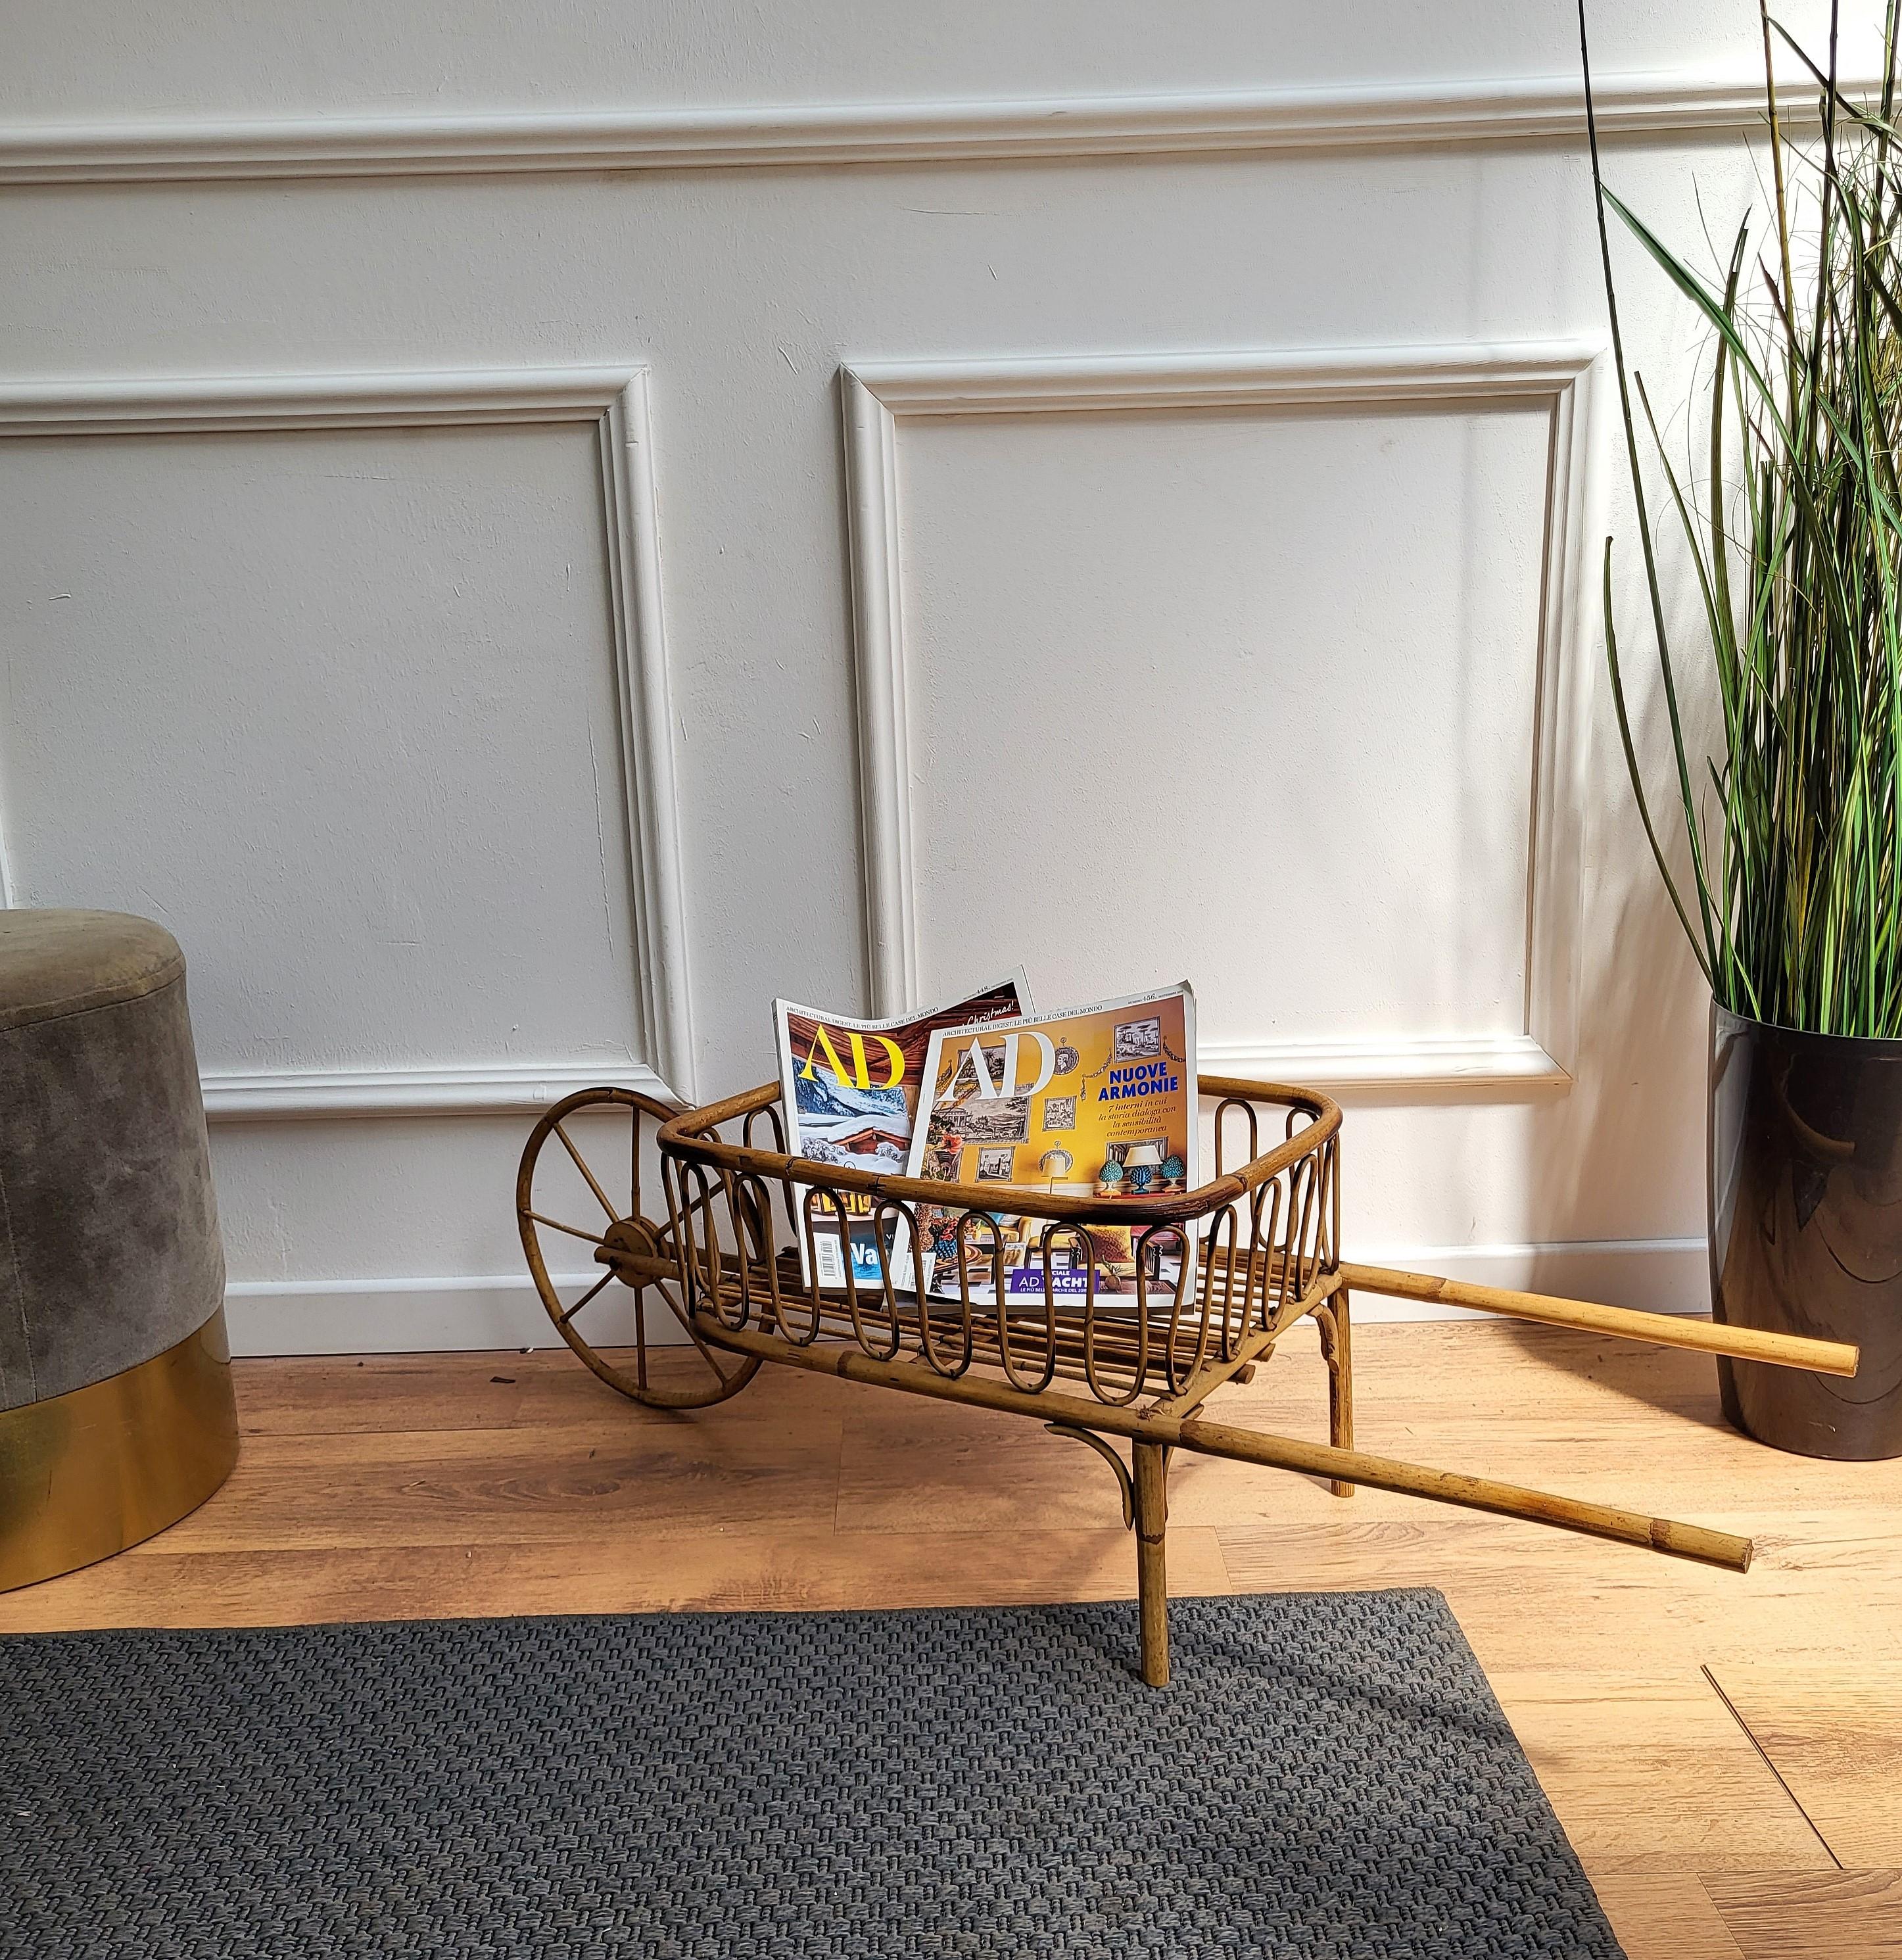 Beautiful, funny and very nice 1960s Italian Mid-Century Modern bamboo wheelbarrow basket or container, perfect in any room next to a sofa or in a bedroom as pillow or blanket storage as well as in any bathroom as bathrobe and towels or as a